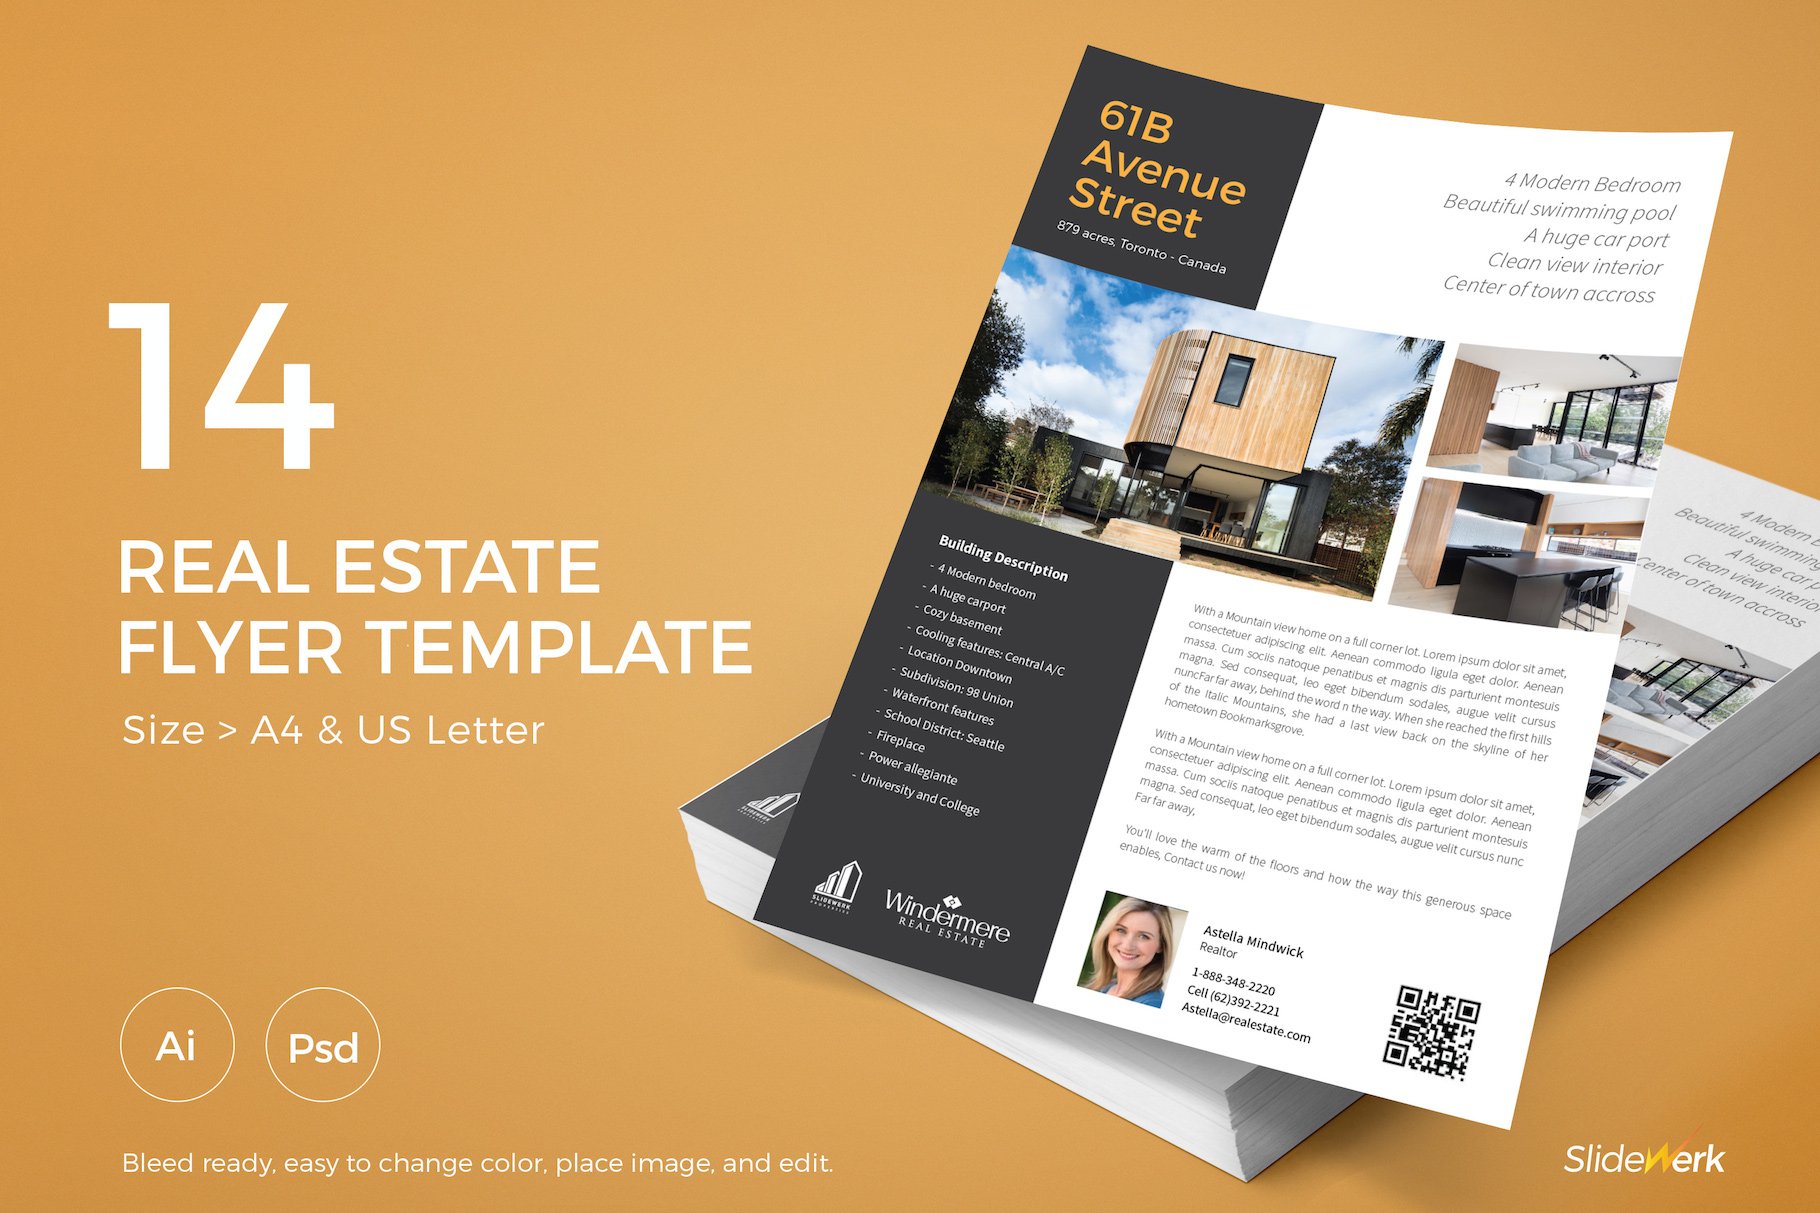 Real Estate Flyer 14 cover image.